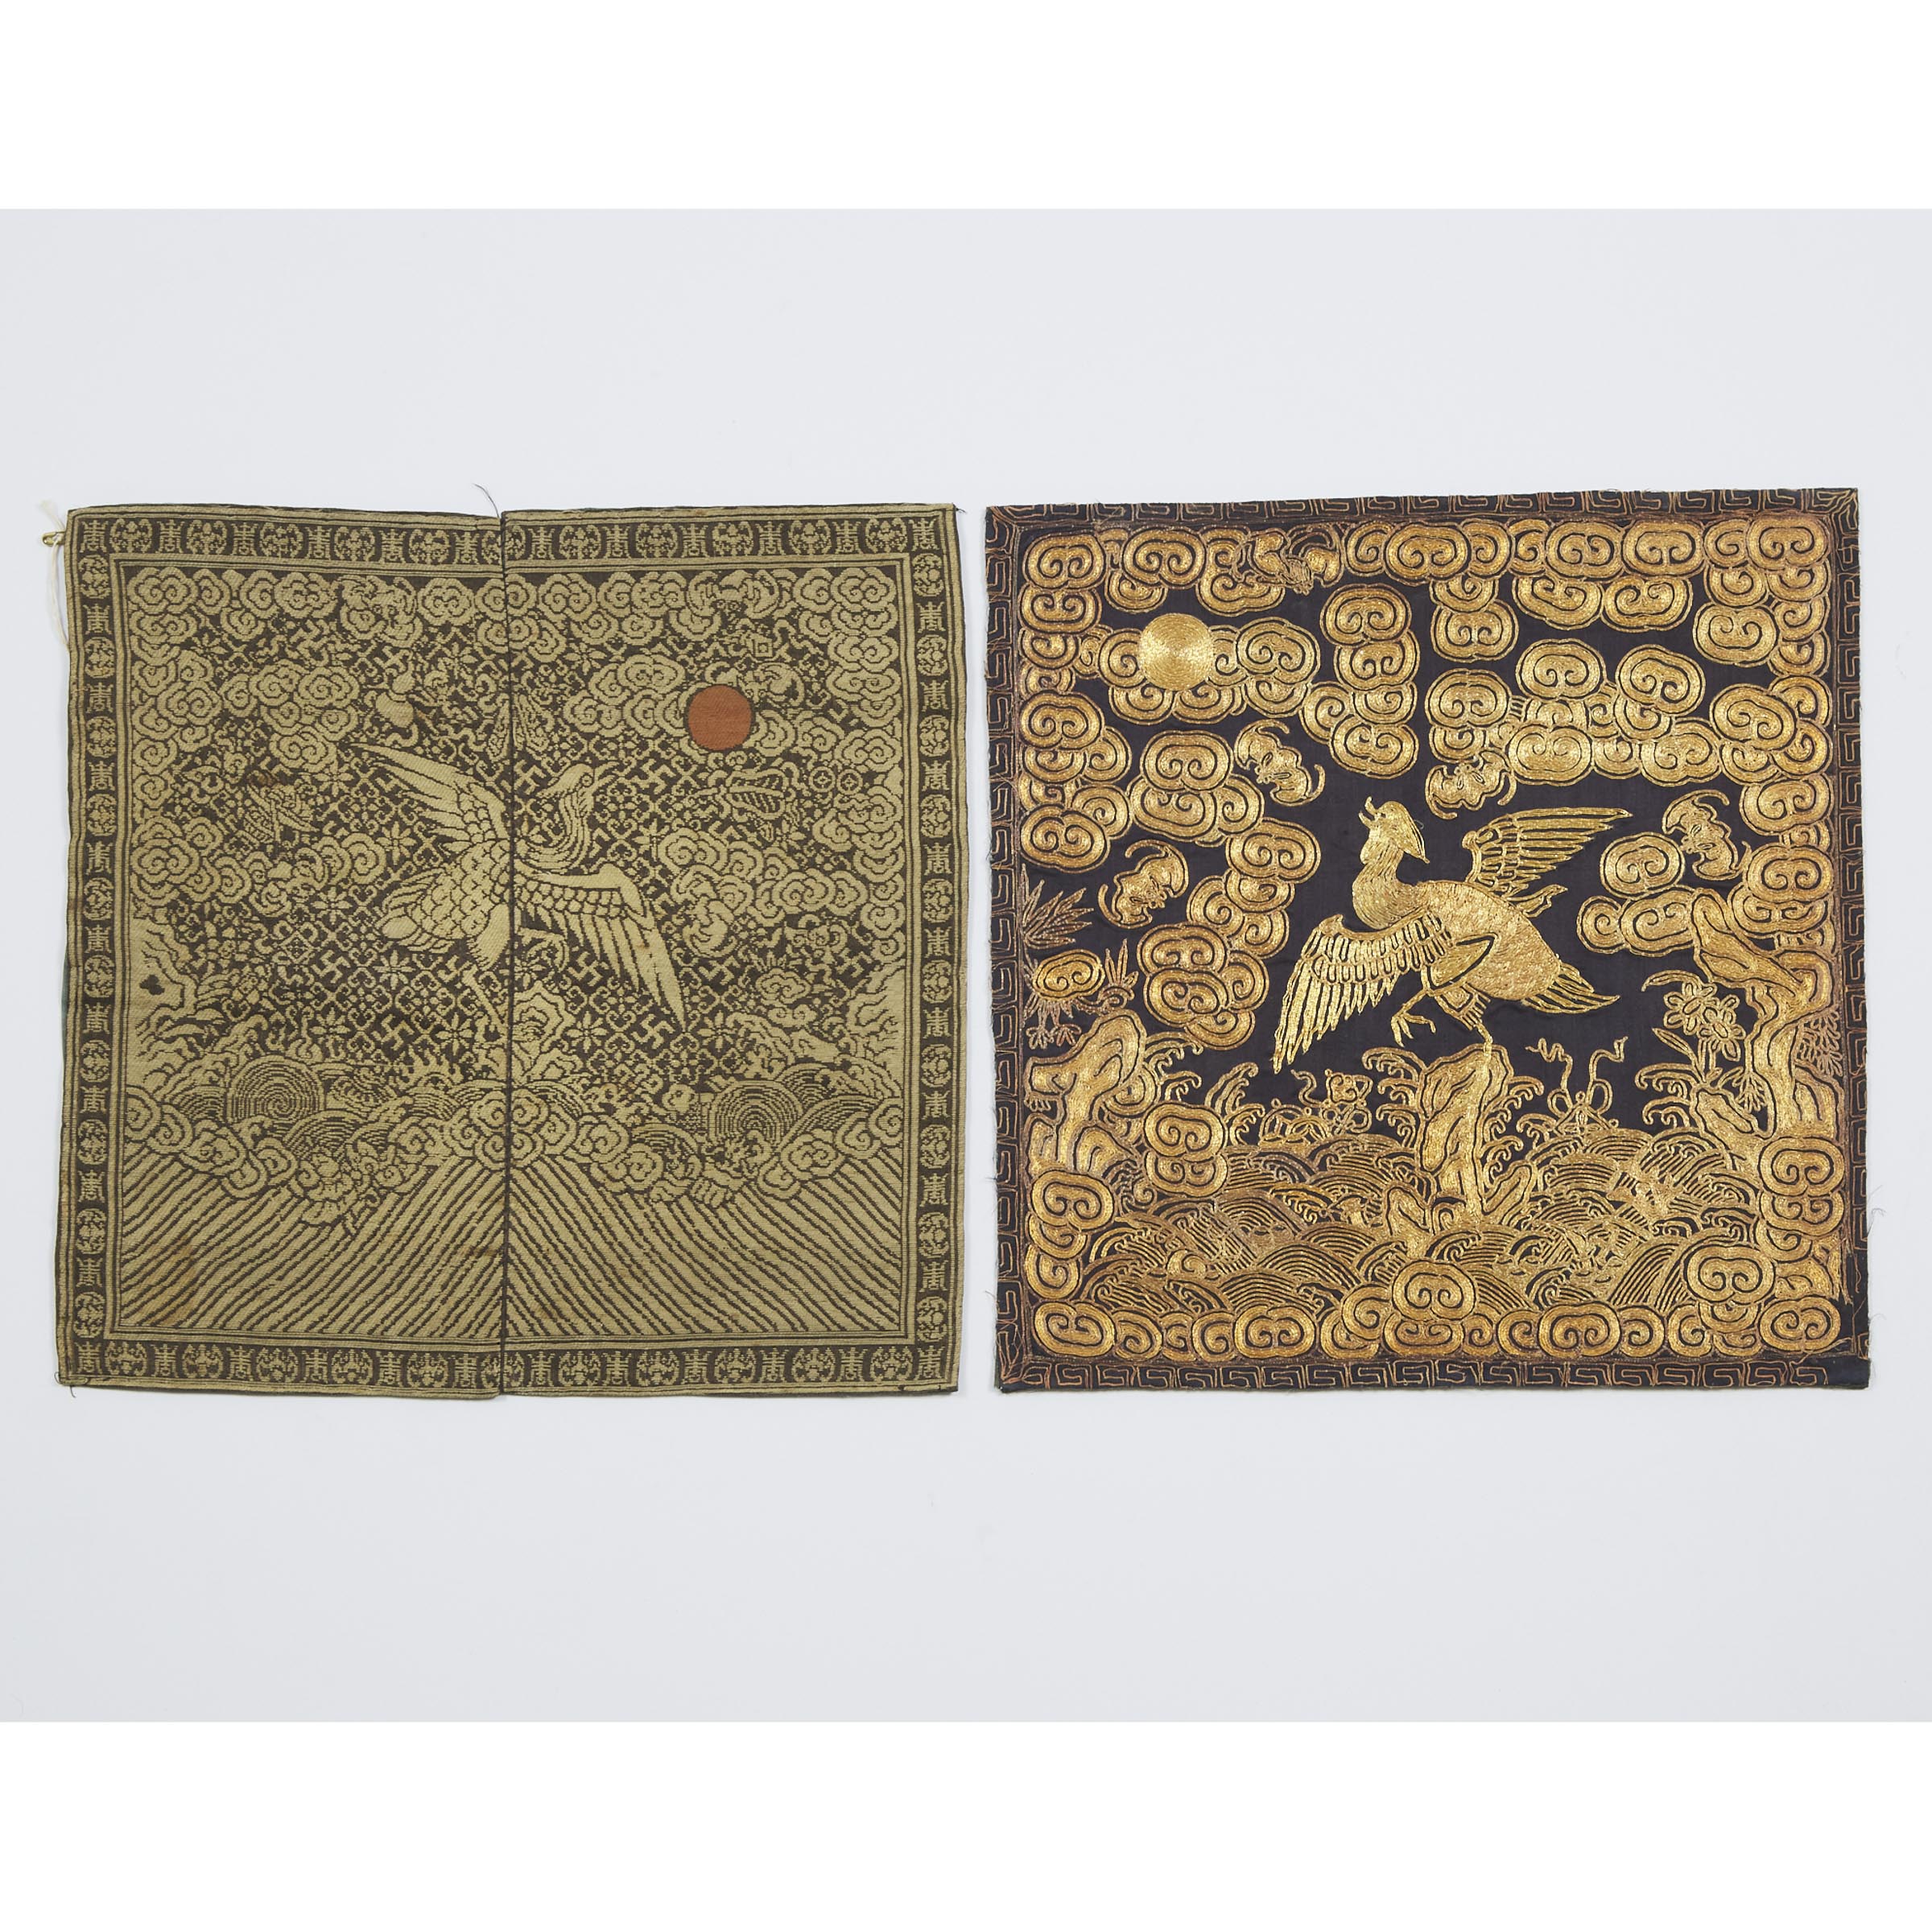 Two Embroidered Seventh Rank Civil Official 'Mandarin Duck' Badges, Buzi, 19th Century